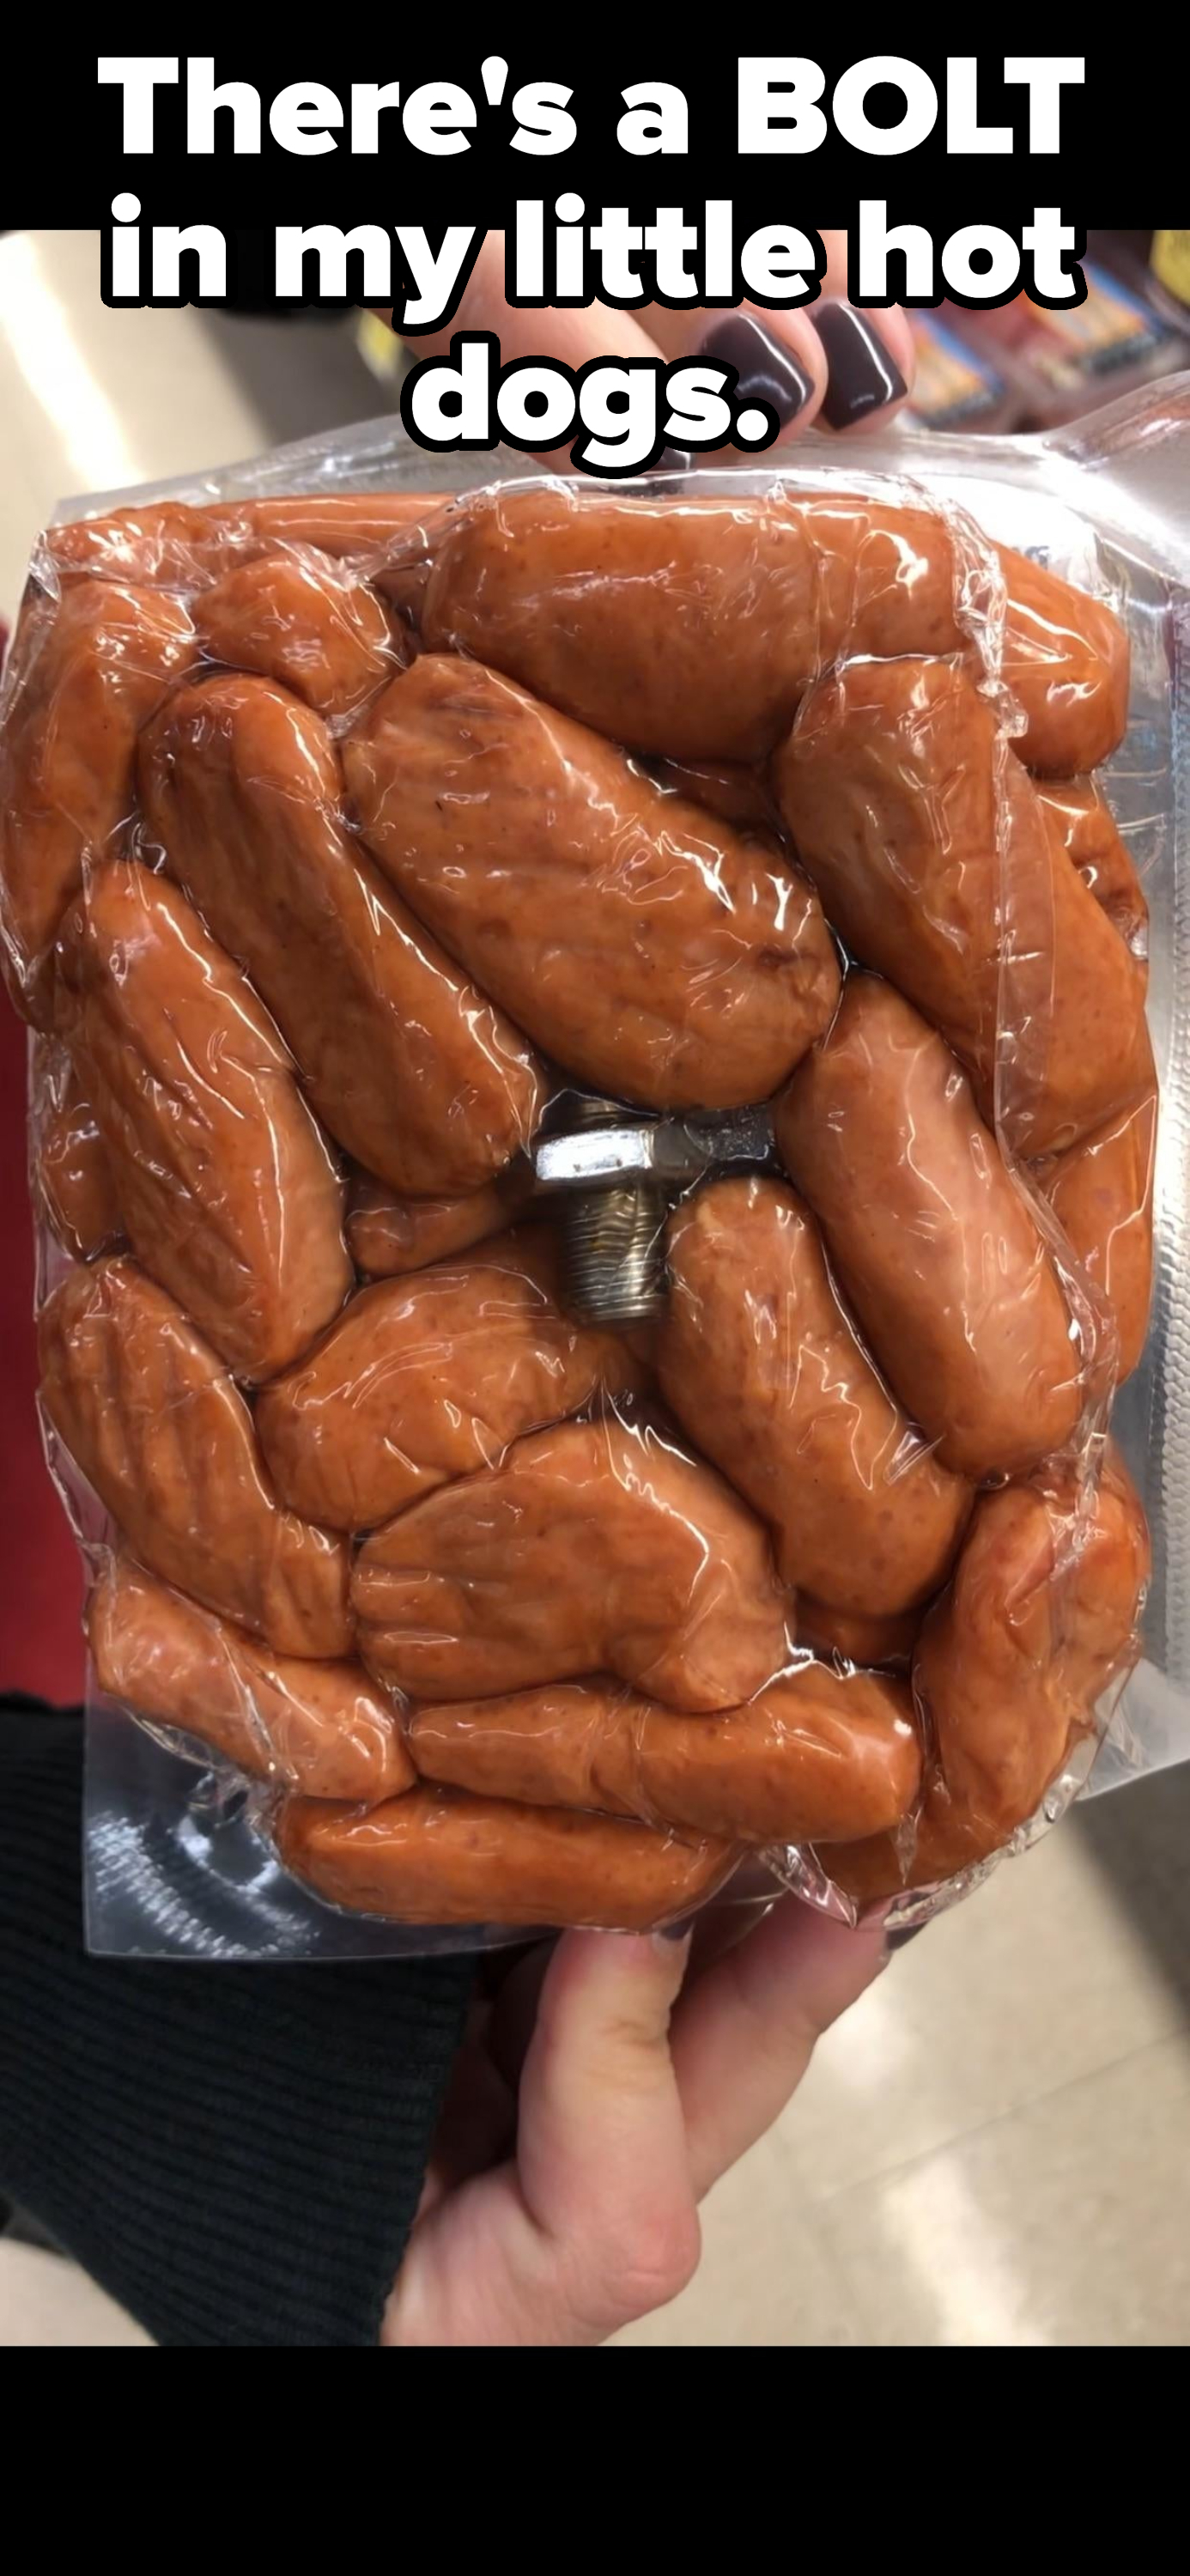 Hand holding a package of mini smoked wieners containing a thick bolt with caption &quot;There&#x27;s a BOLT in my little hot dogs&quot;